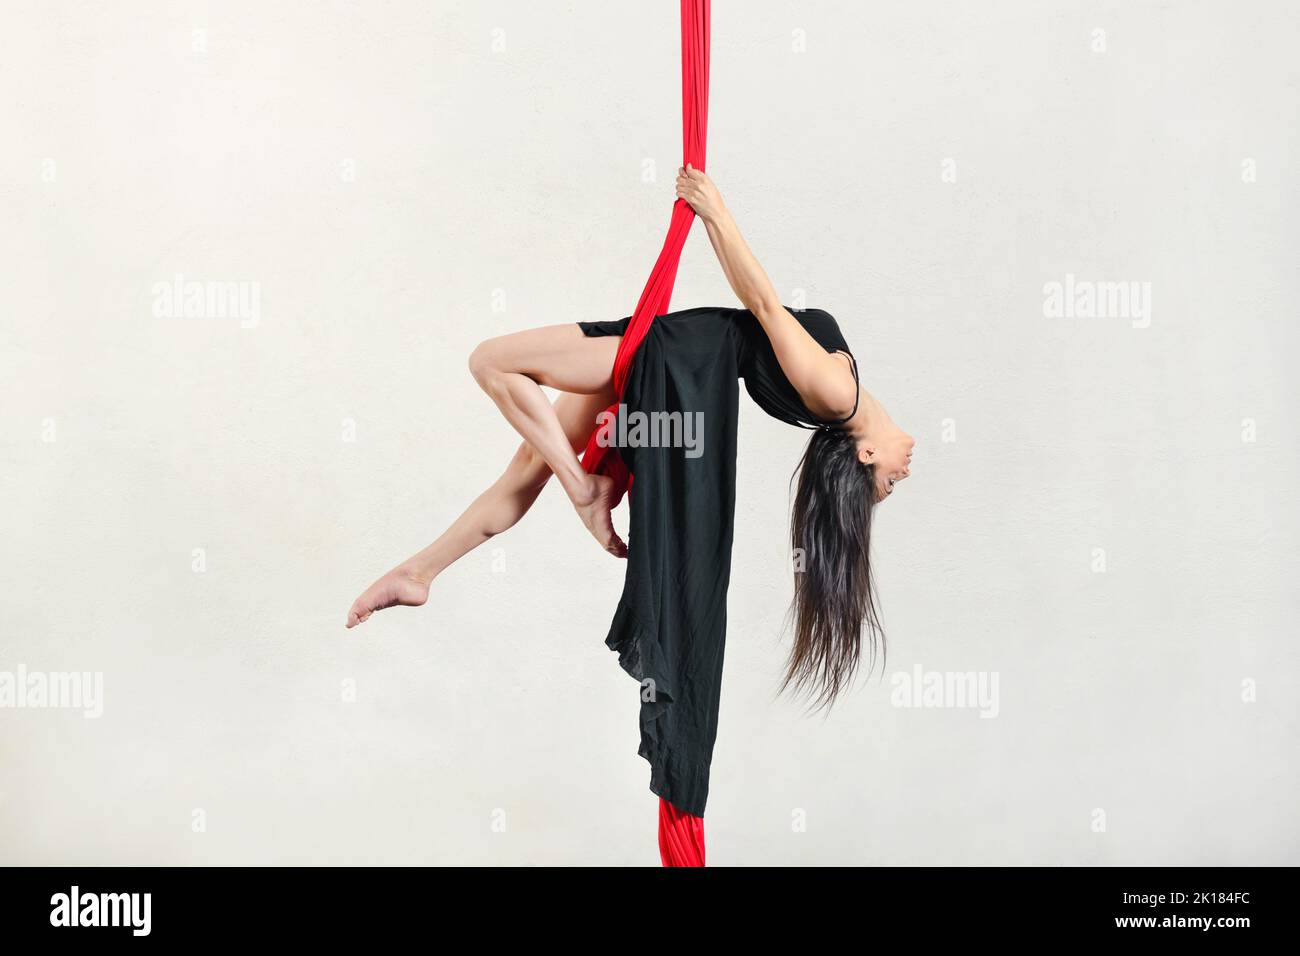 Full body side view of active female aerialist performing swing exercise on aerial silks against white background during training in studio Stock Photo